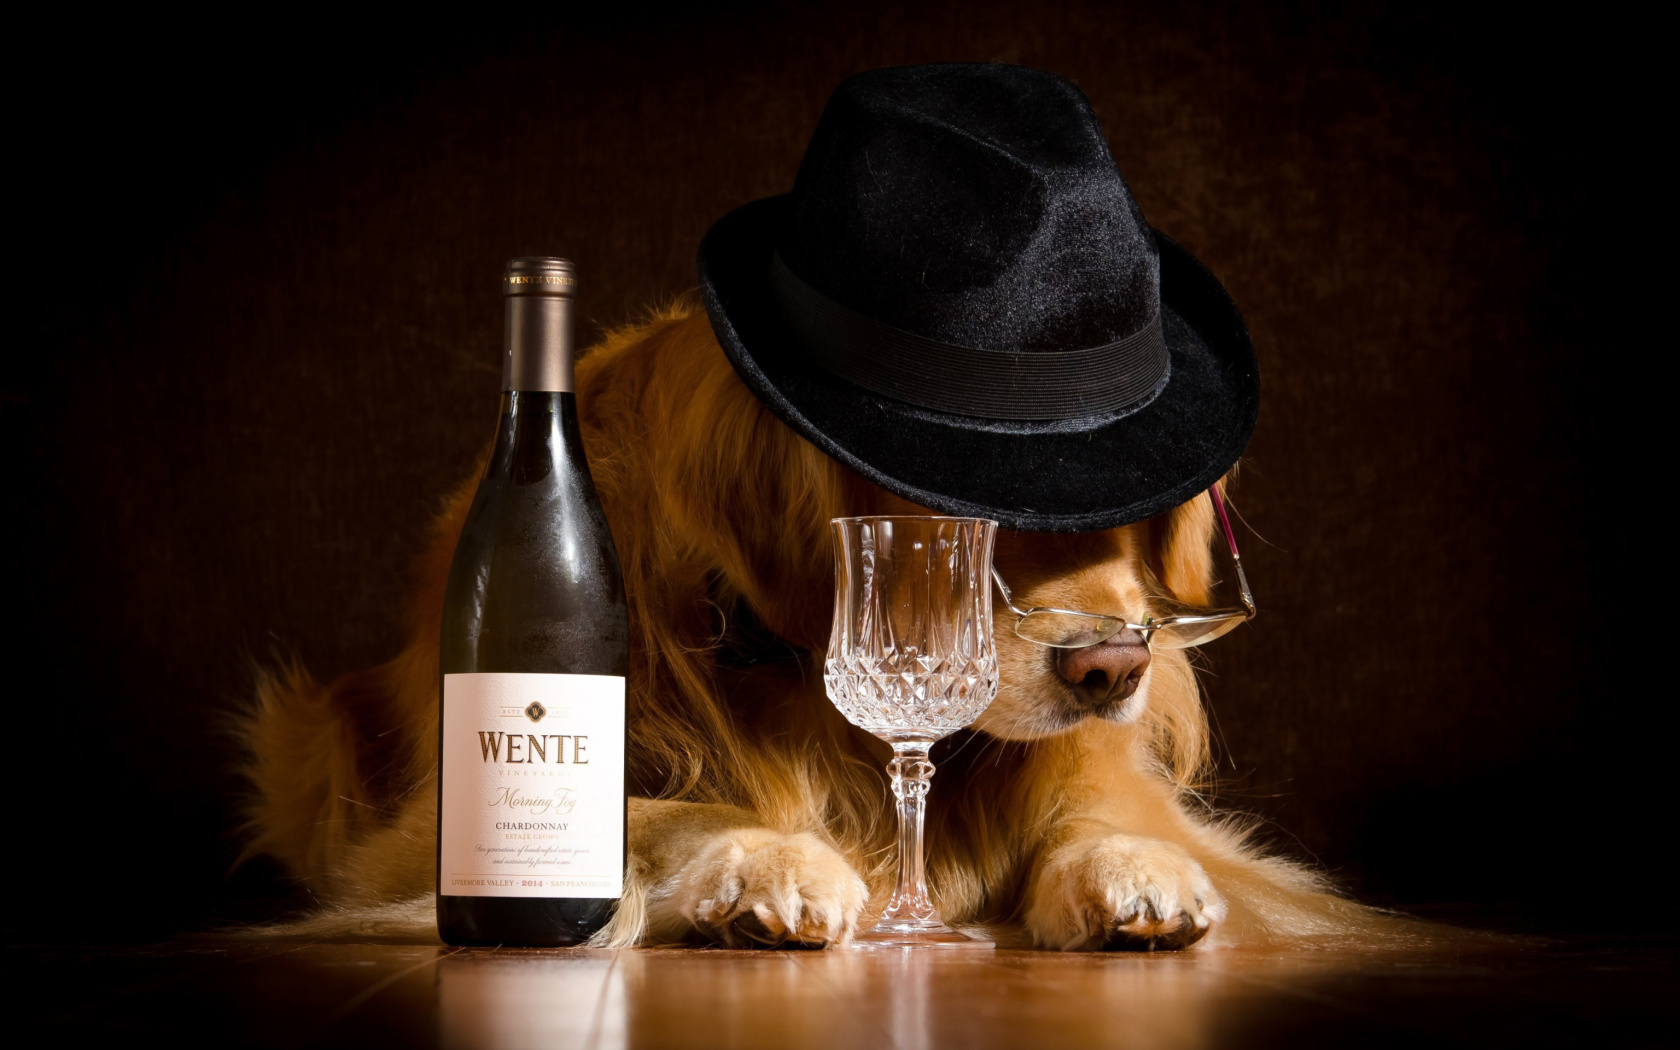 Wine and Dog wallpaper 1680x1050